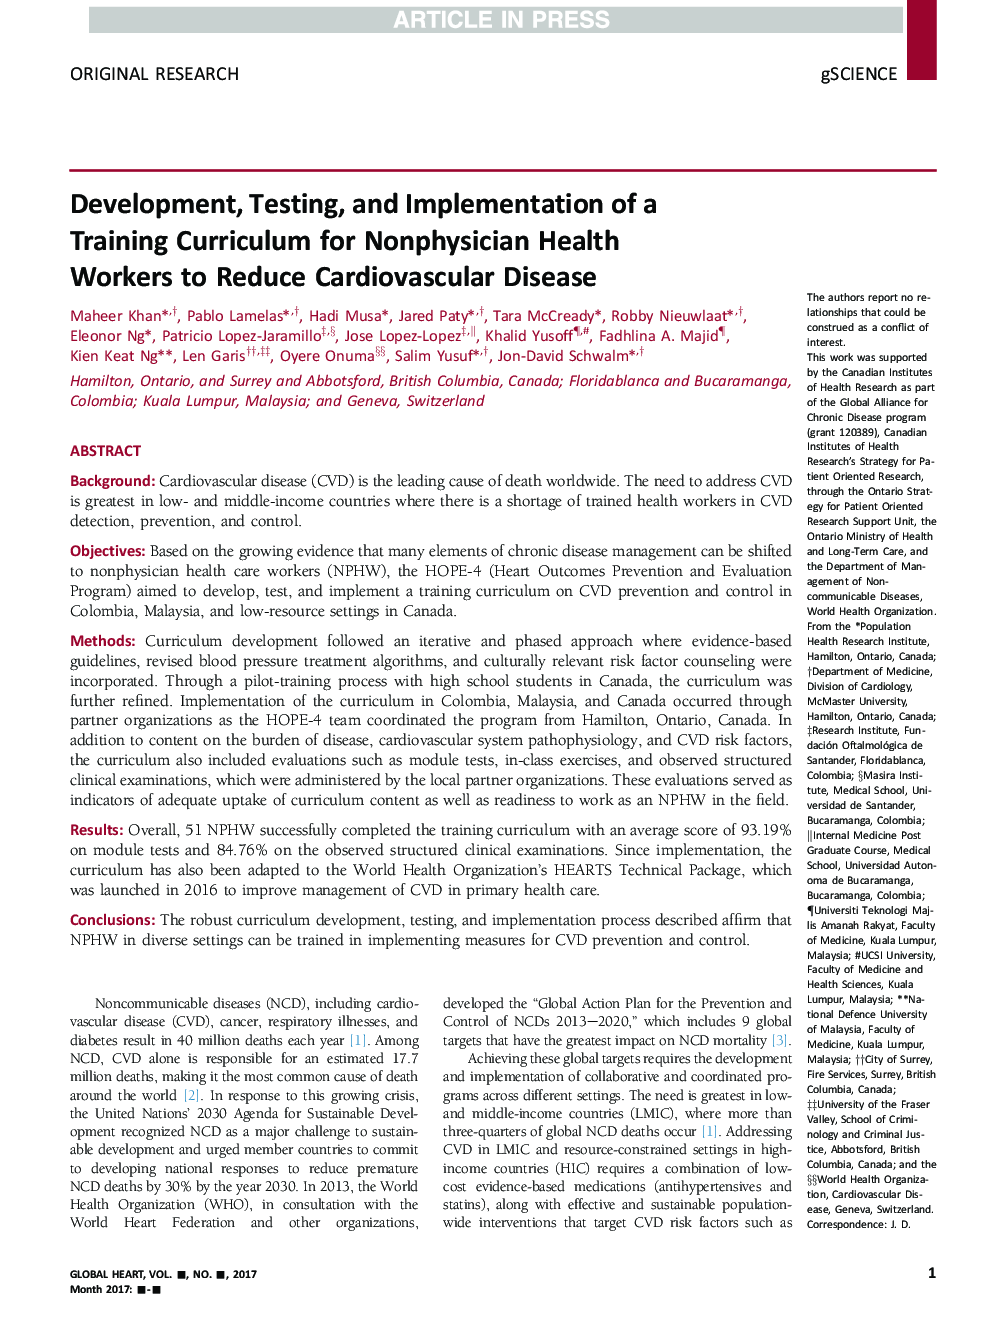 Development, Testing, and Implementation of a Training Curriculum for Nonphysician Health Workers to Reduce Cardiovascular Disease